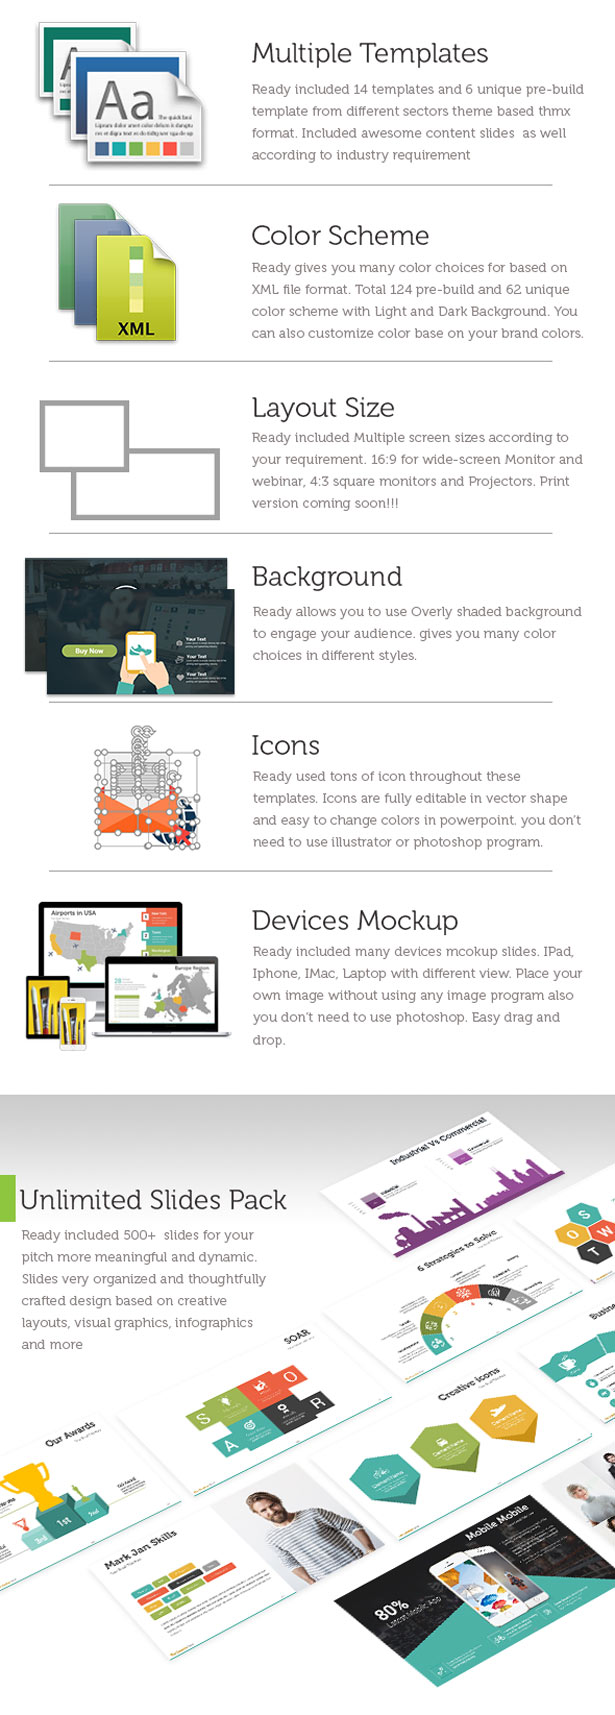 Powerpoint Mockup, Powerpoint freatures